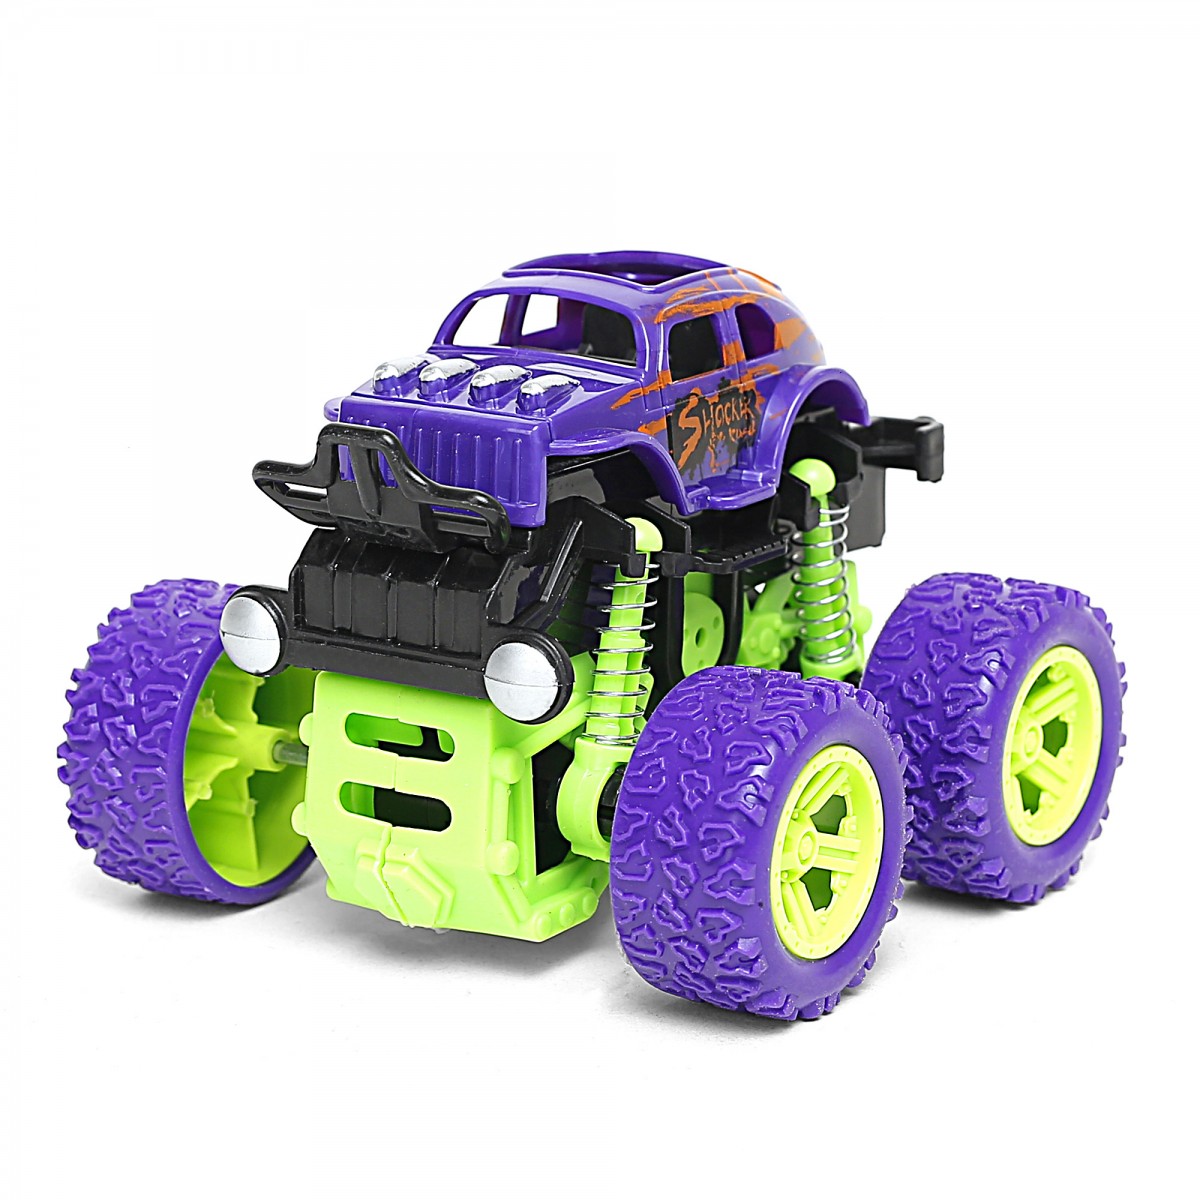 Ralleyz Friction Toy Car With Grip Wheels 4 Wheel Drive Force Amazing Kids Play Mini Toy Car Purple 6Y+